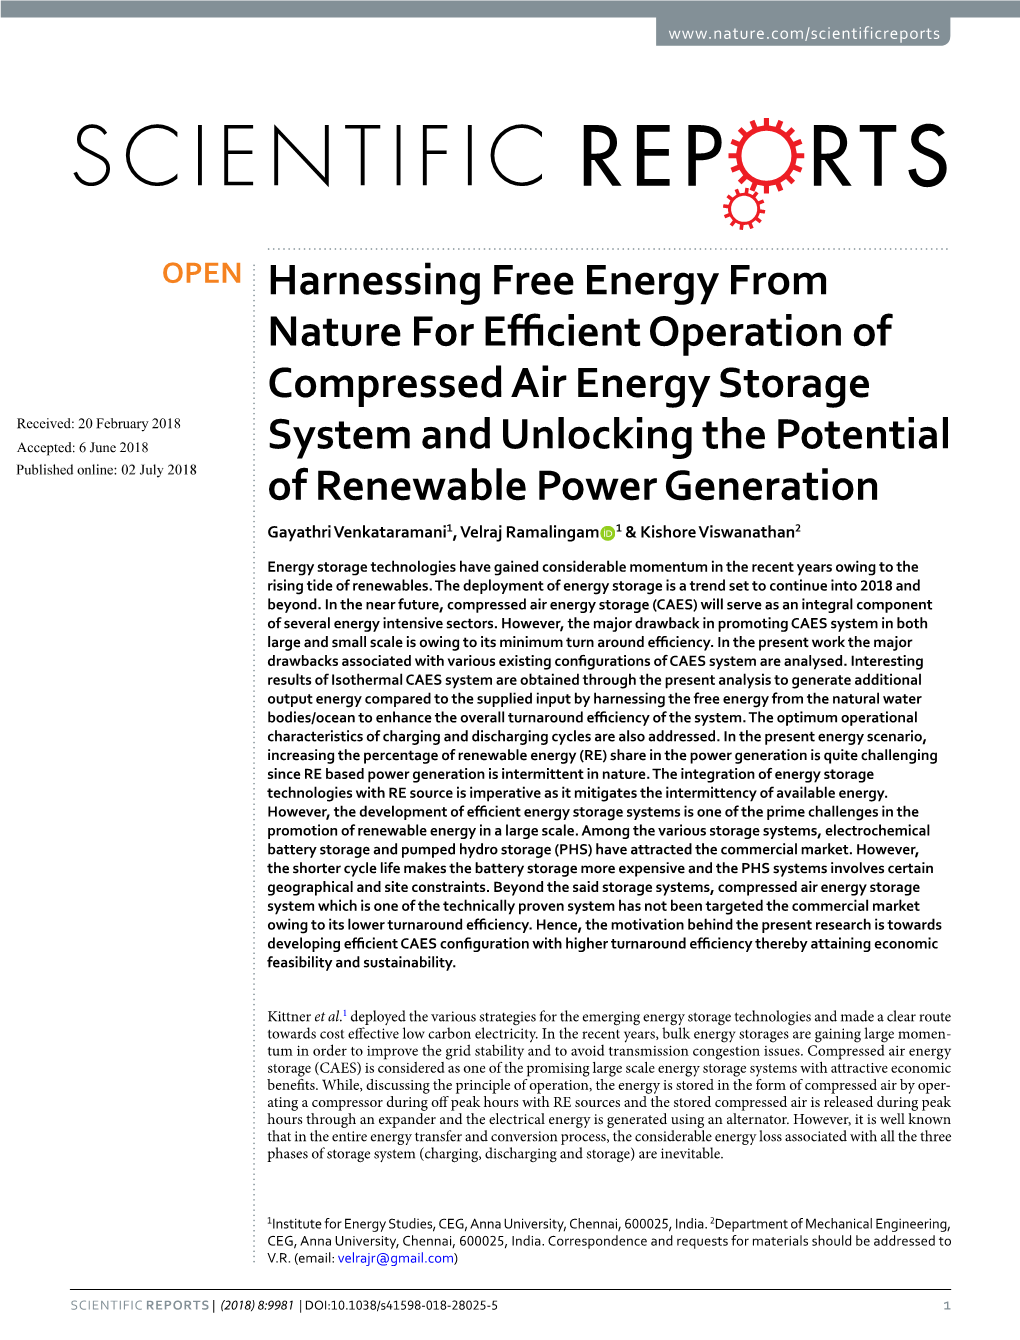 Harnessing Free Energy from Nature for Efficient Operation Of